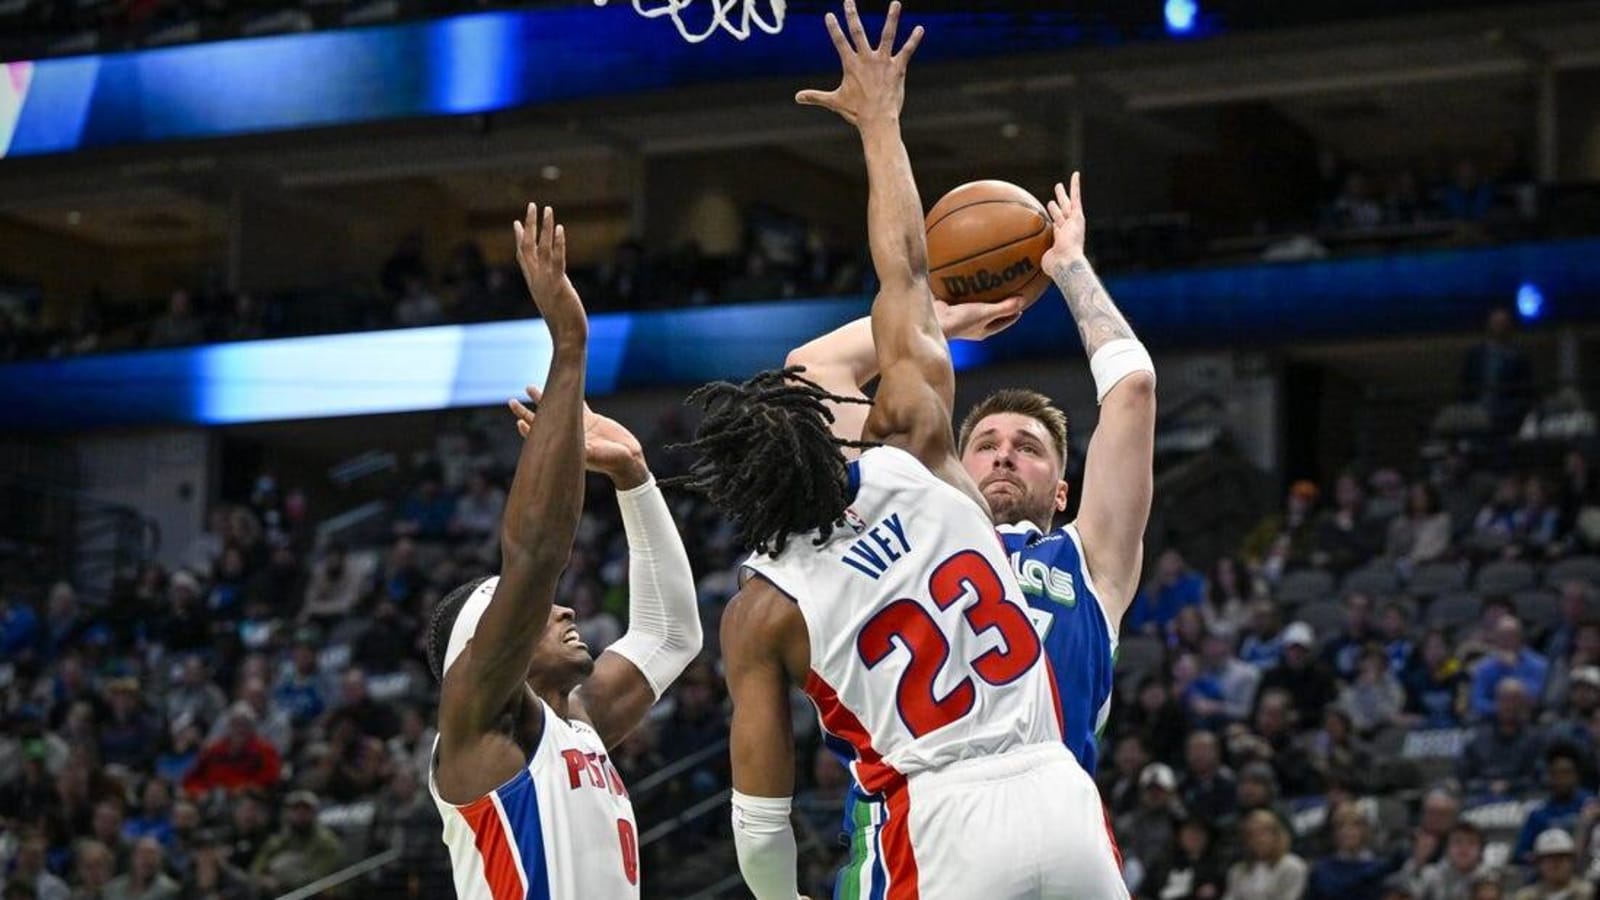 Luka Doncic eclipses 50 again as Mavs beat Pistons